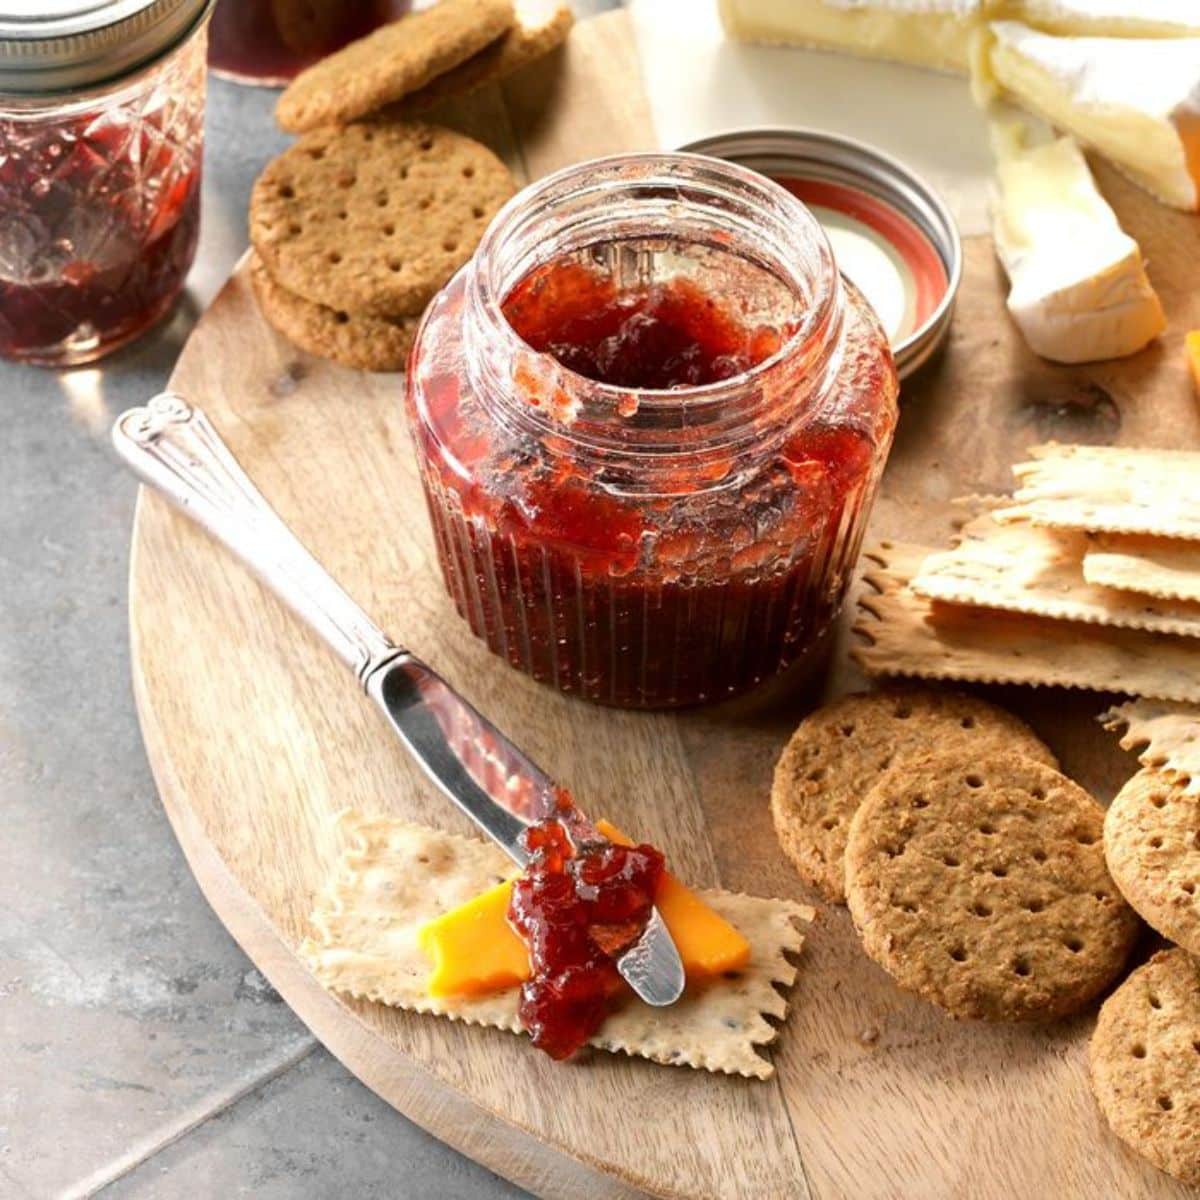 Spiced cranberry, apple, and grape conserve in a glass jar on a wooden tray with crackers.